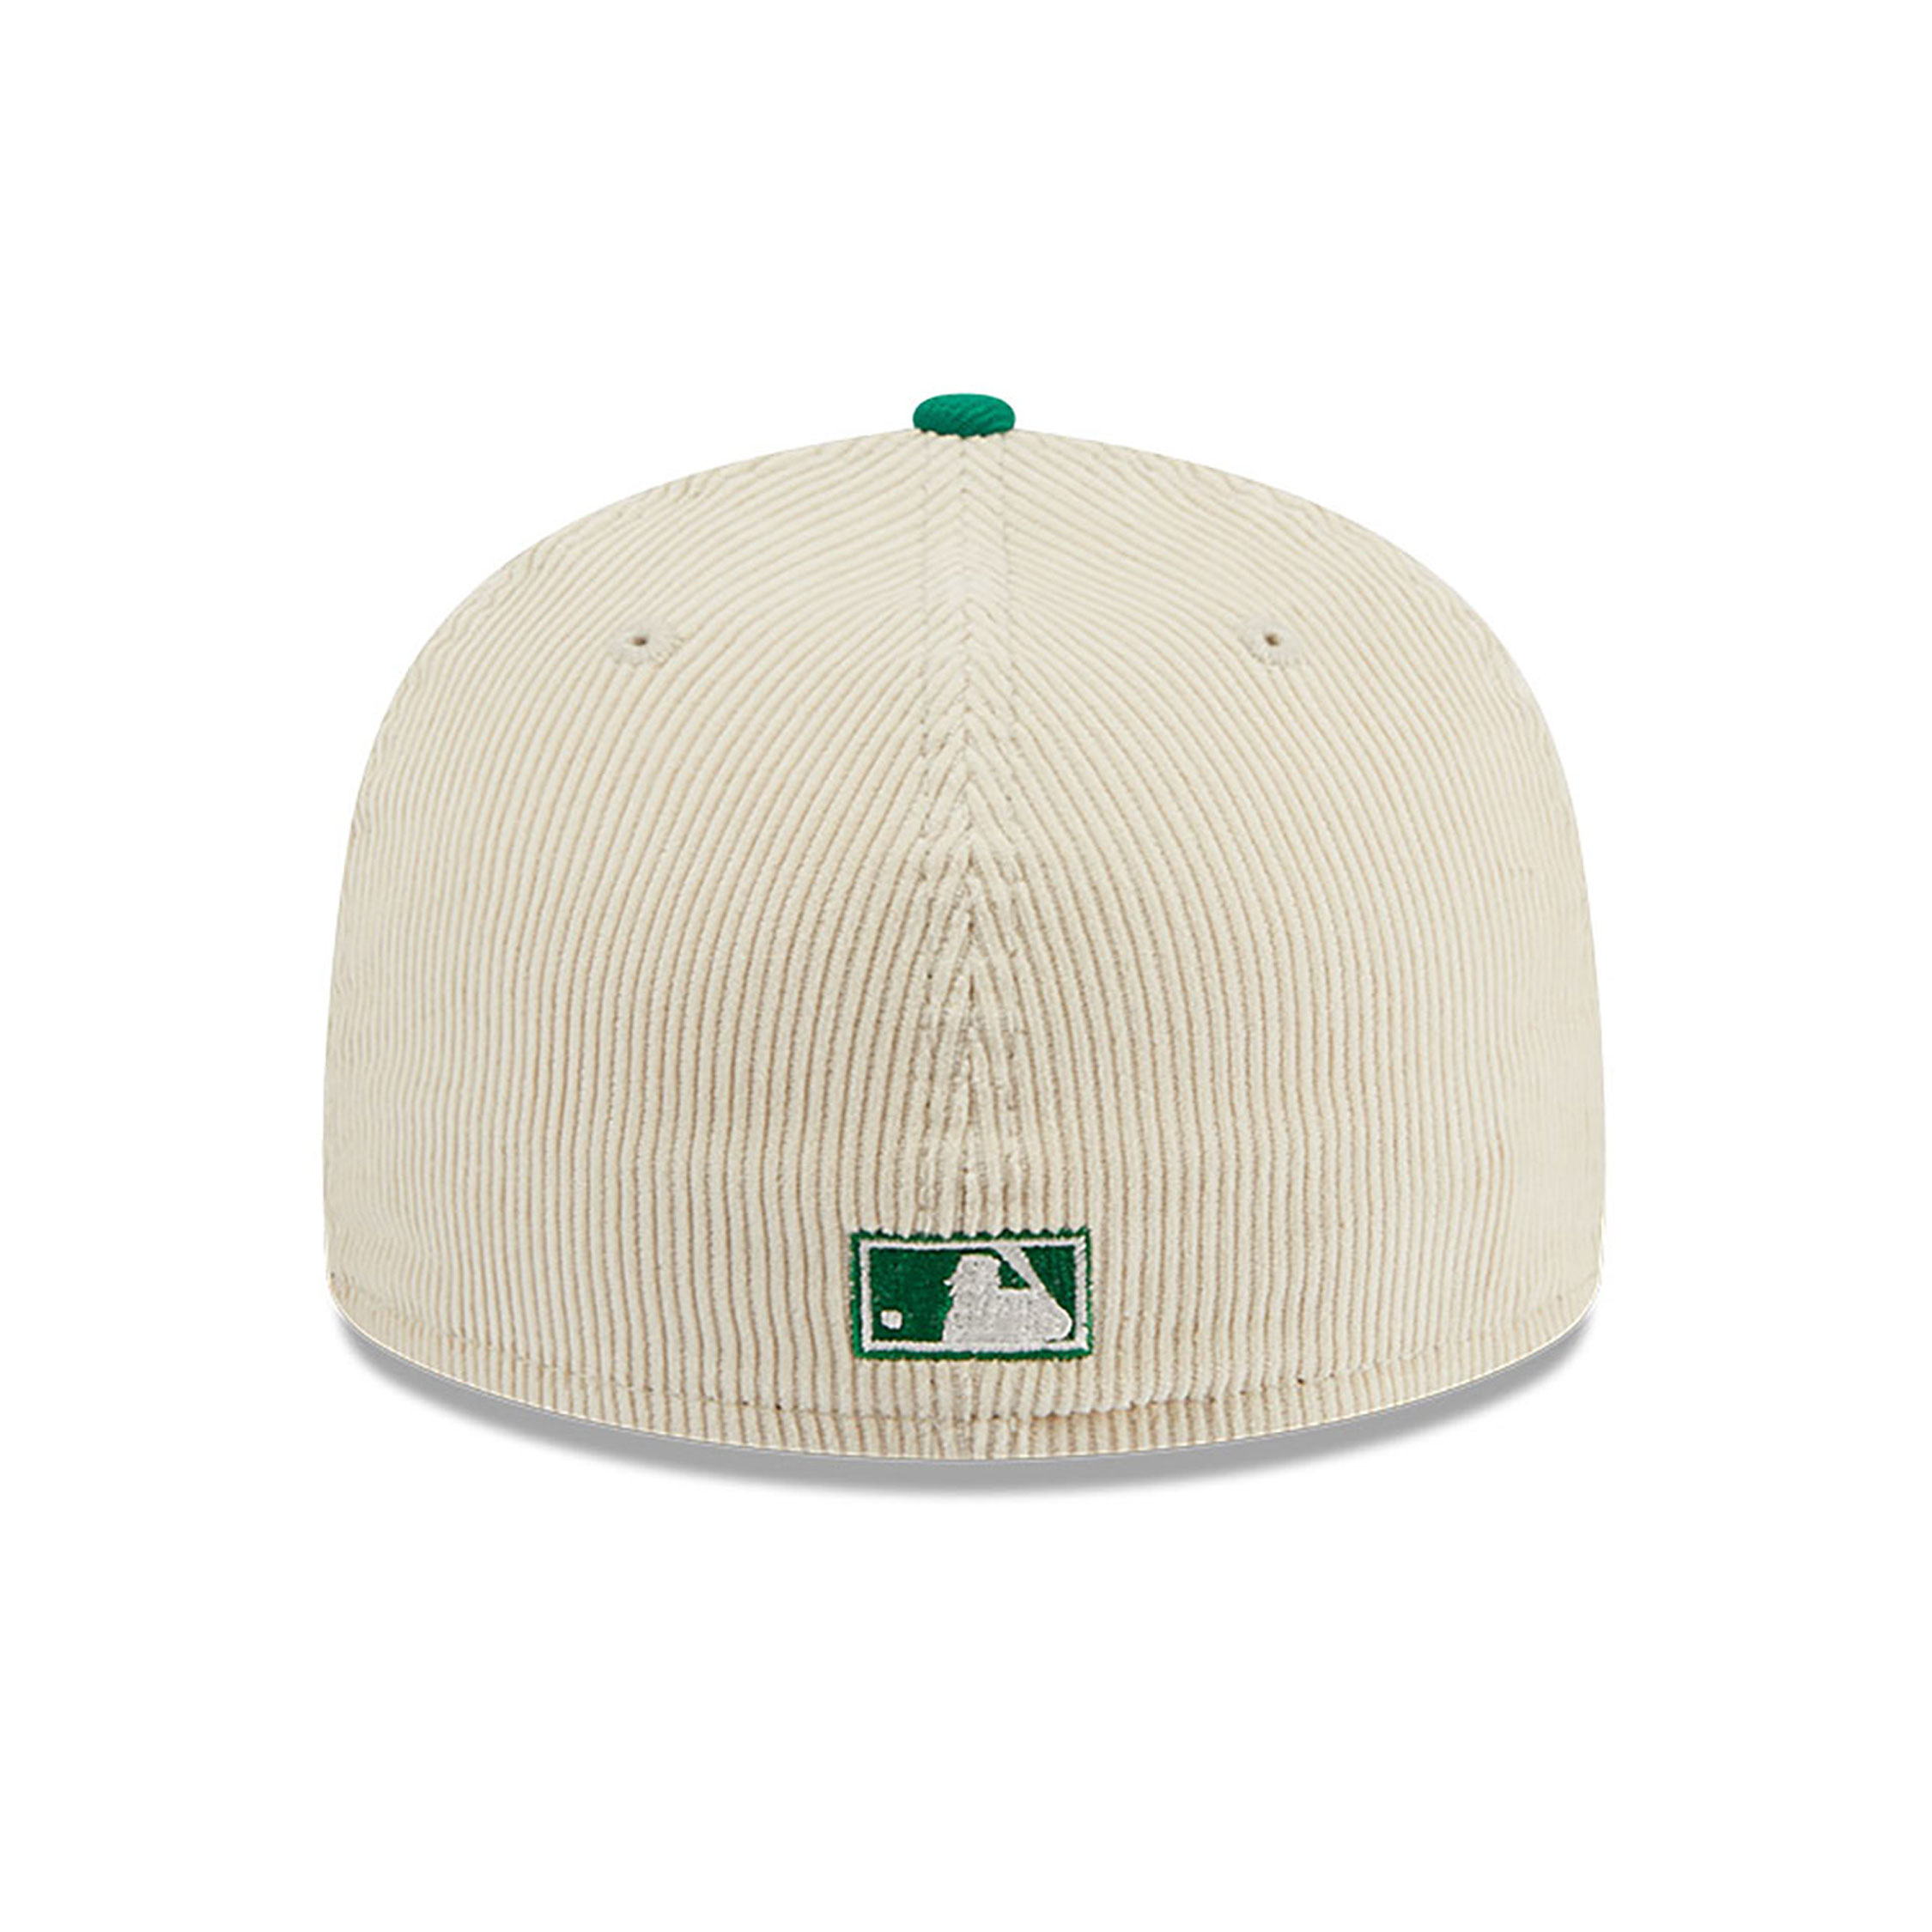 Oakland Athletics Cord Classic Off White 59FIFTY Fitted Cap